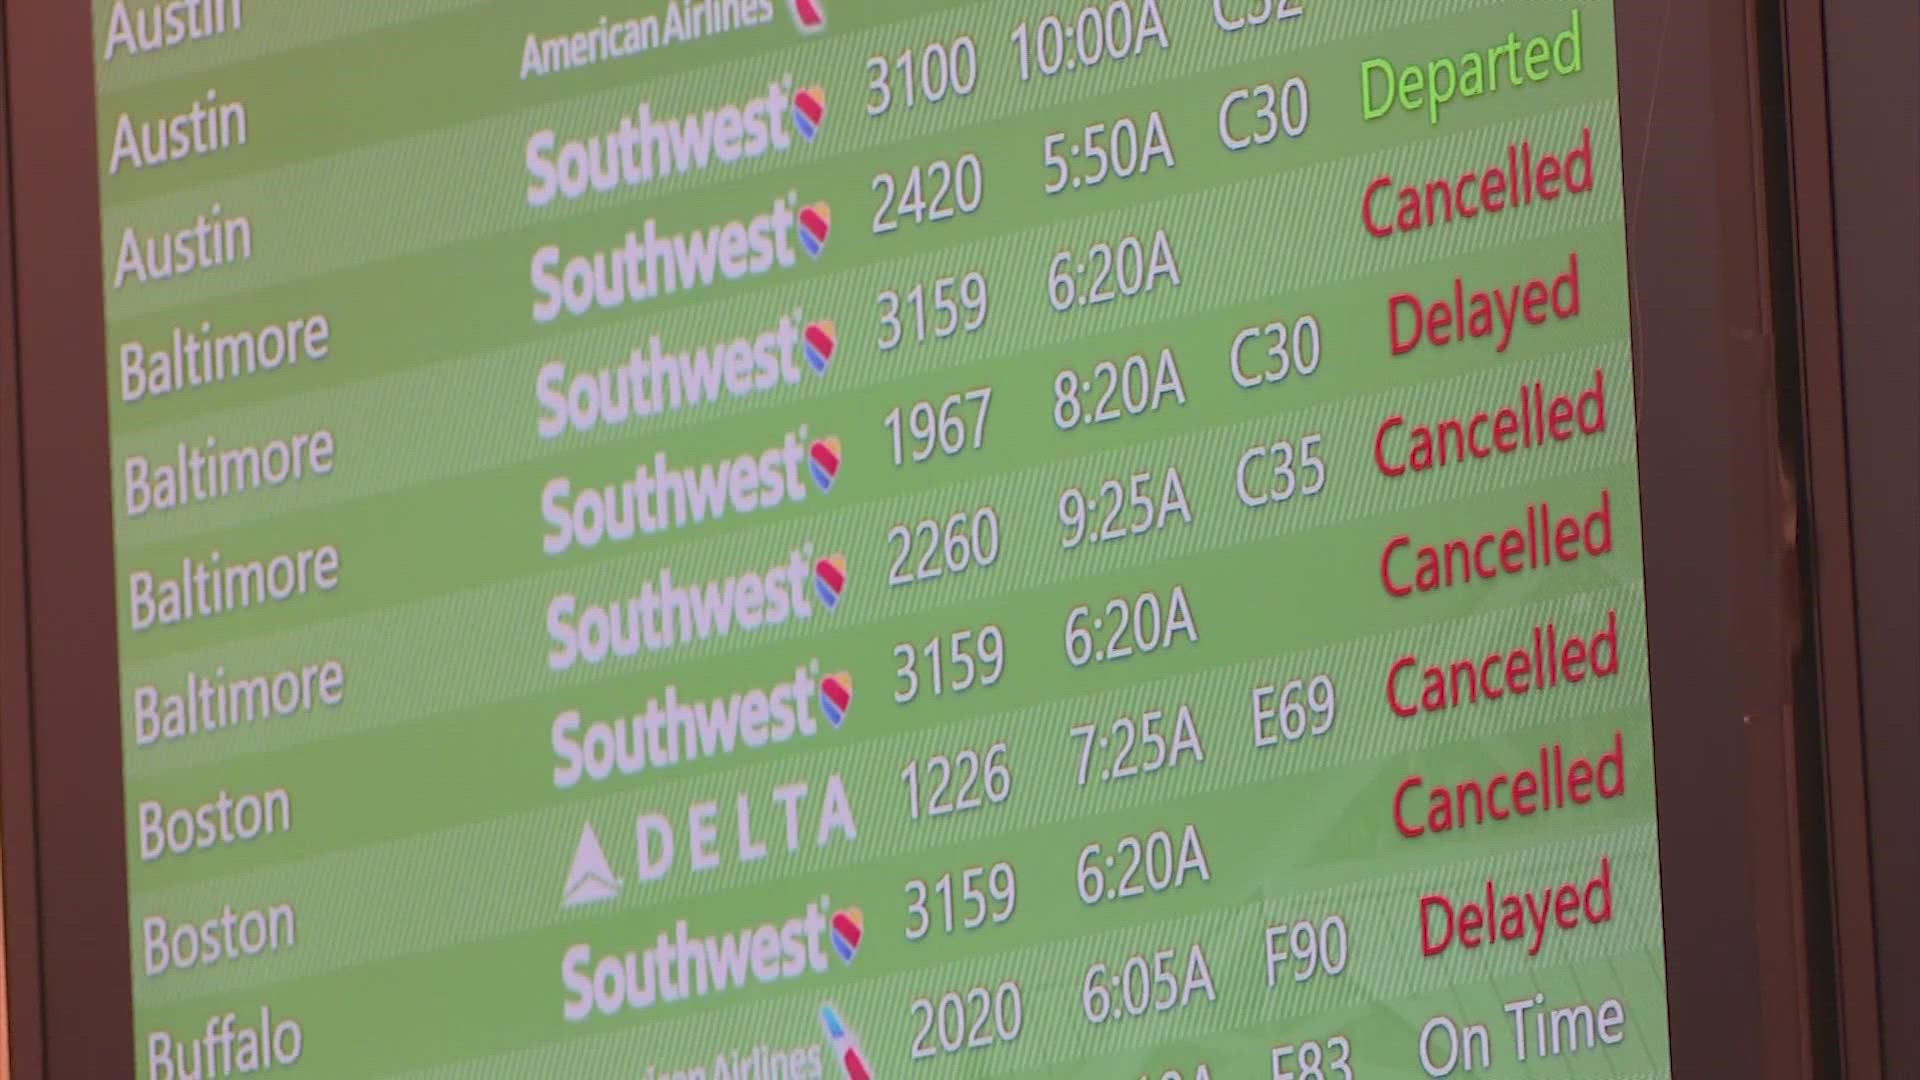 Relief is still days away as Southwest Airlines continues to leave passengers stranded nationwide.